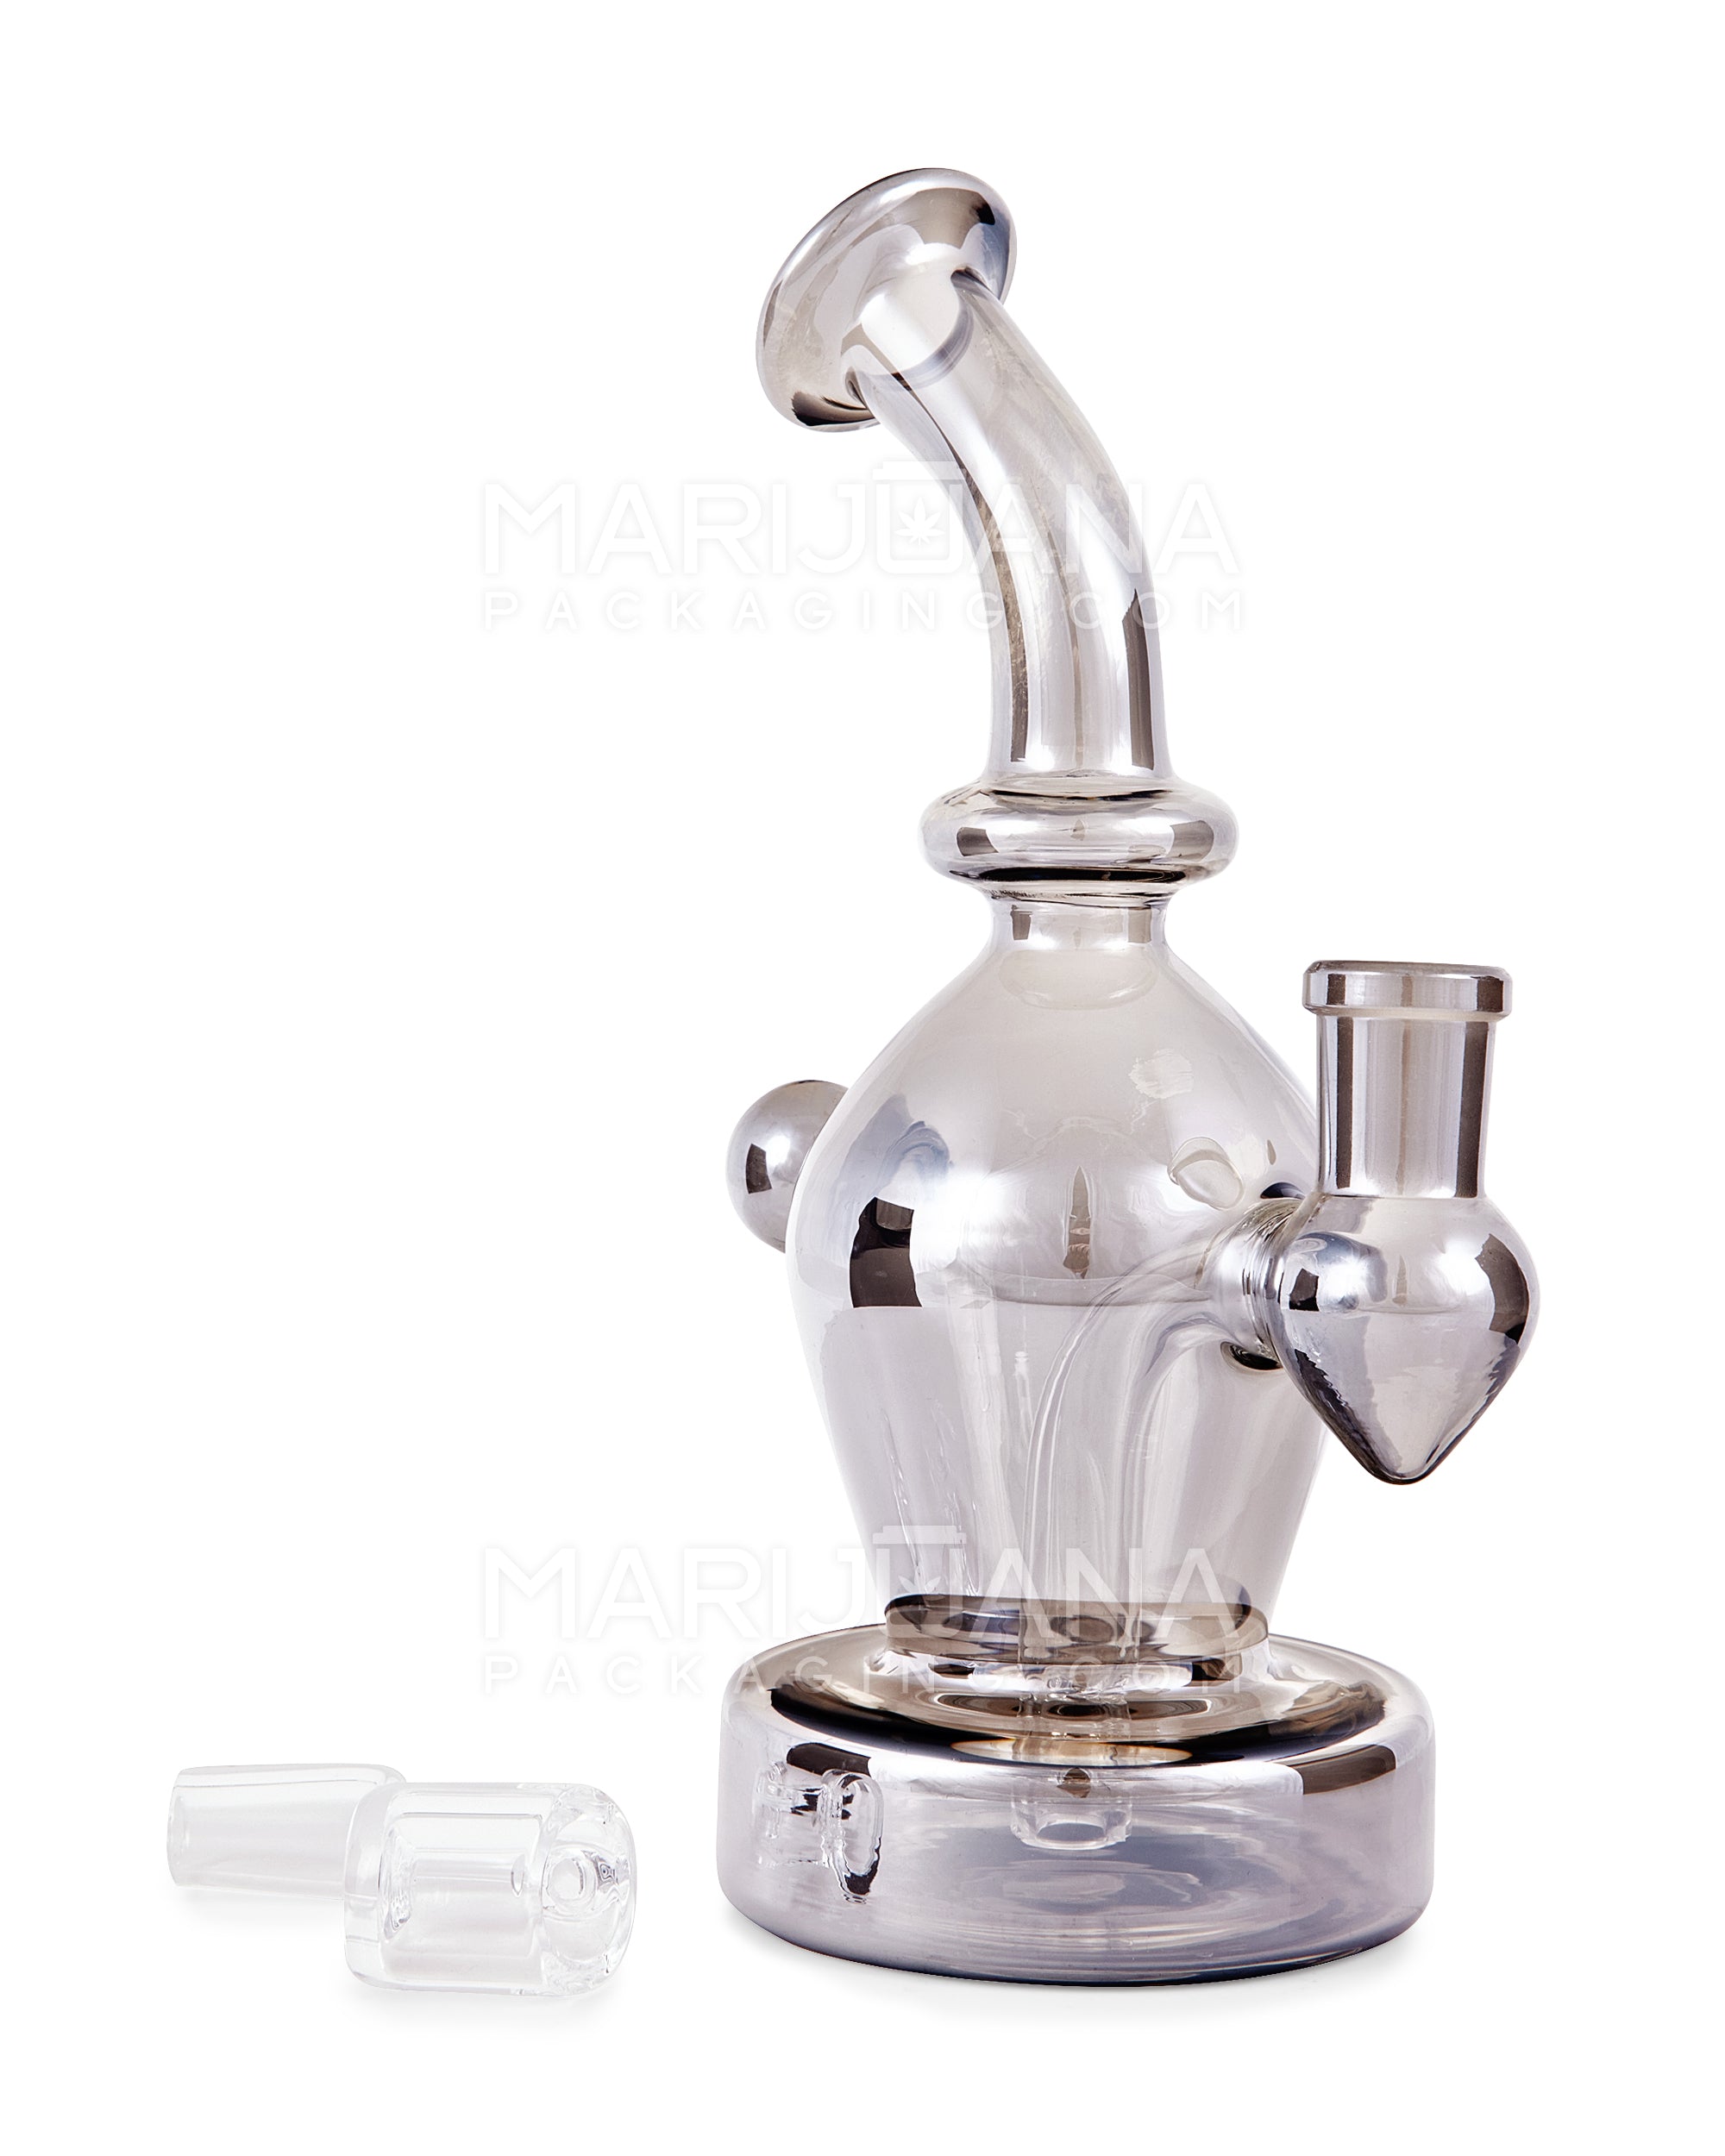 USA Glass | Bent Neck Iridescent Glass Dab Rig w/ Thick Base | 7in Tall - 14mm Banger - Smoke - 2